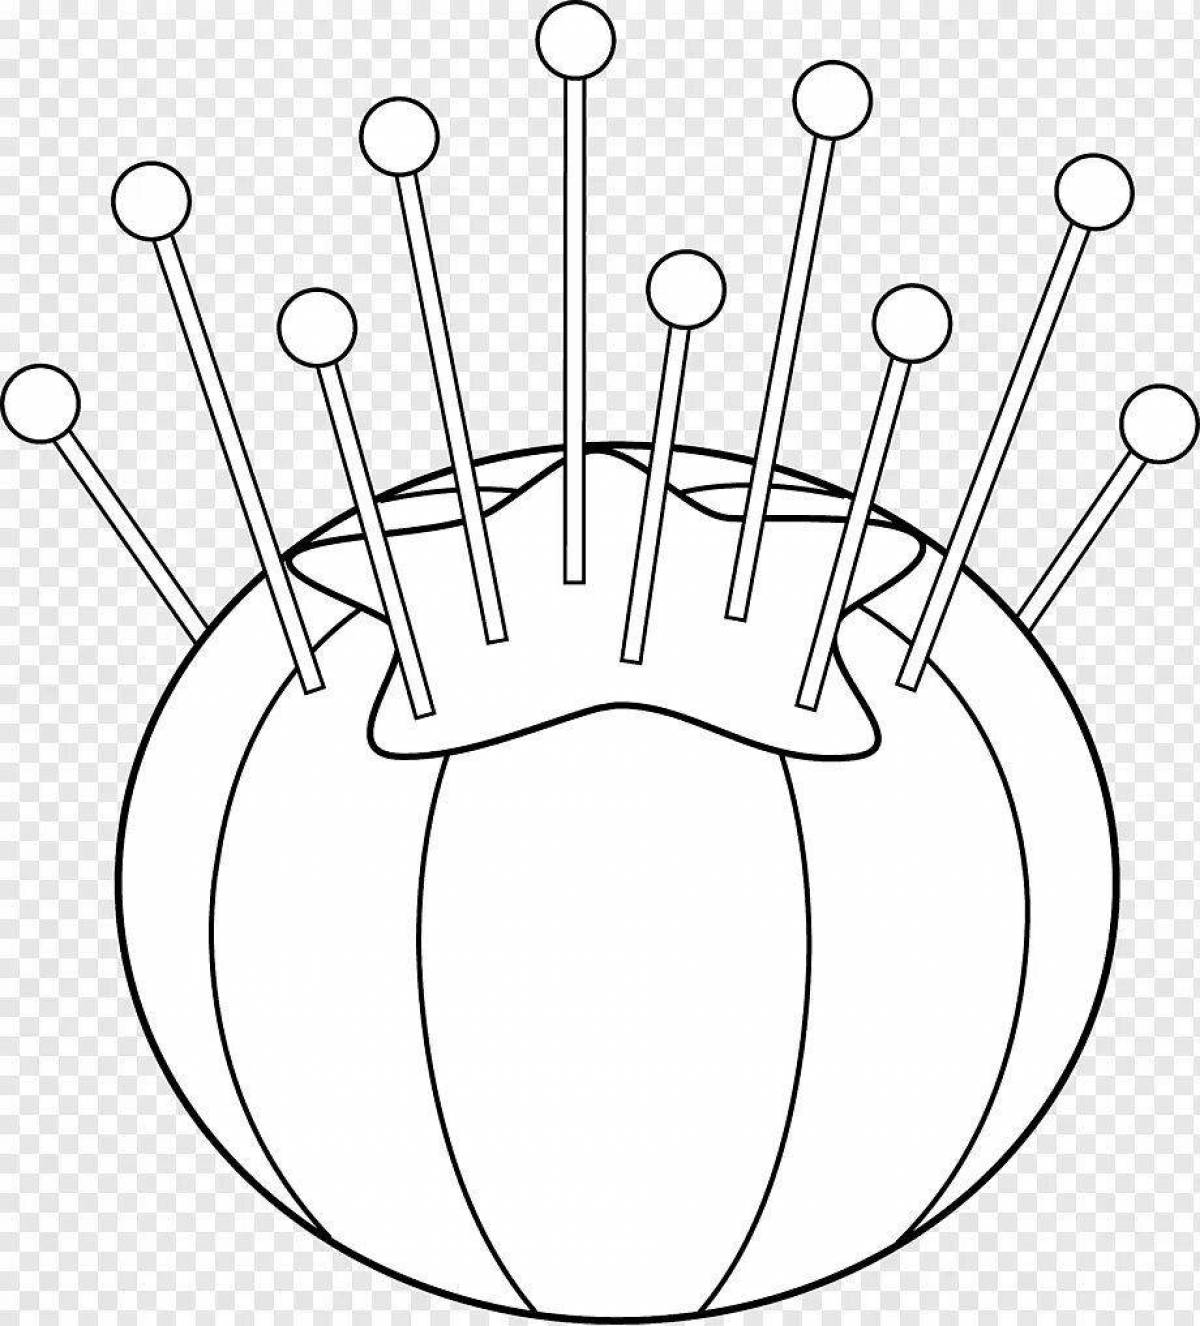 Entertaining needle coloring page for kids